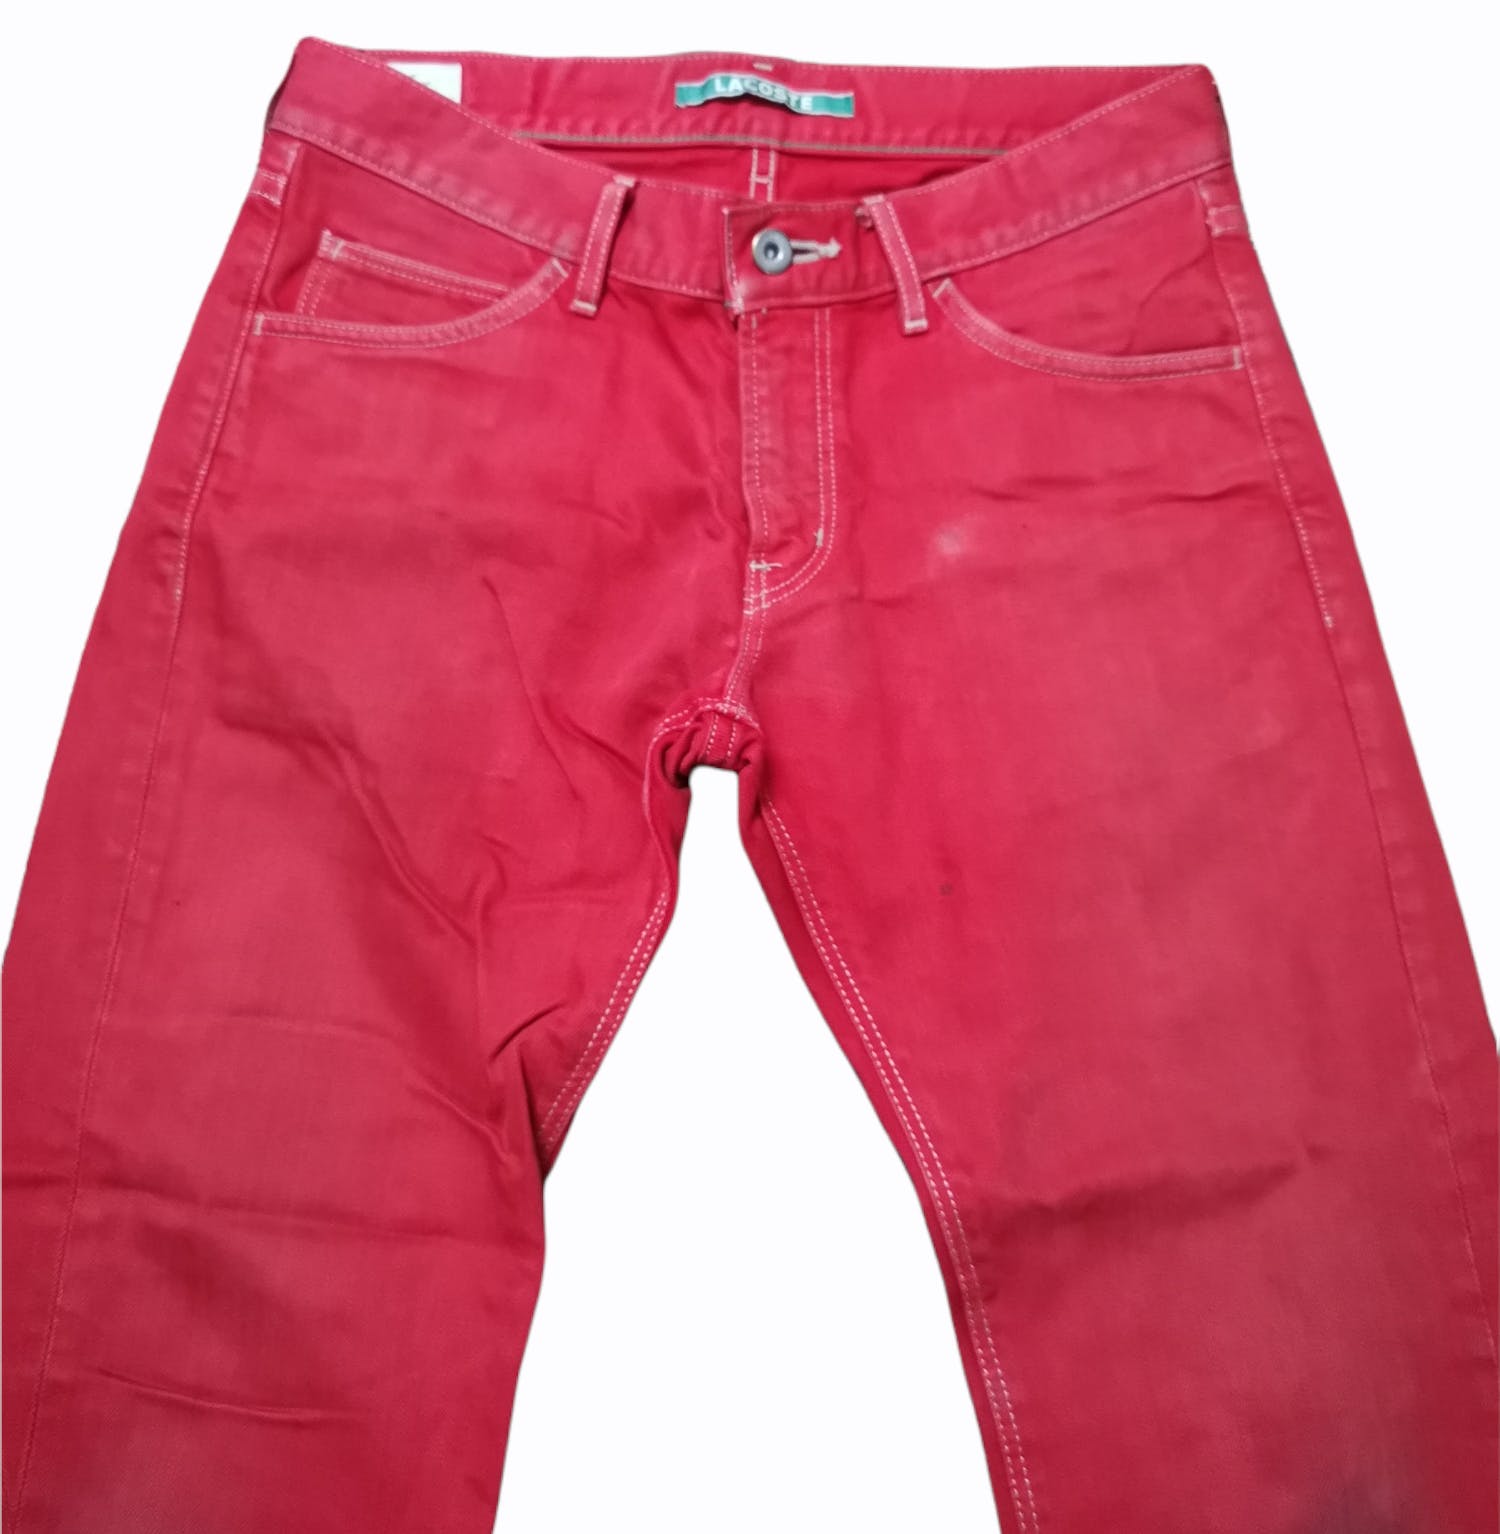 Lacoste Dirty Red Denim - 3